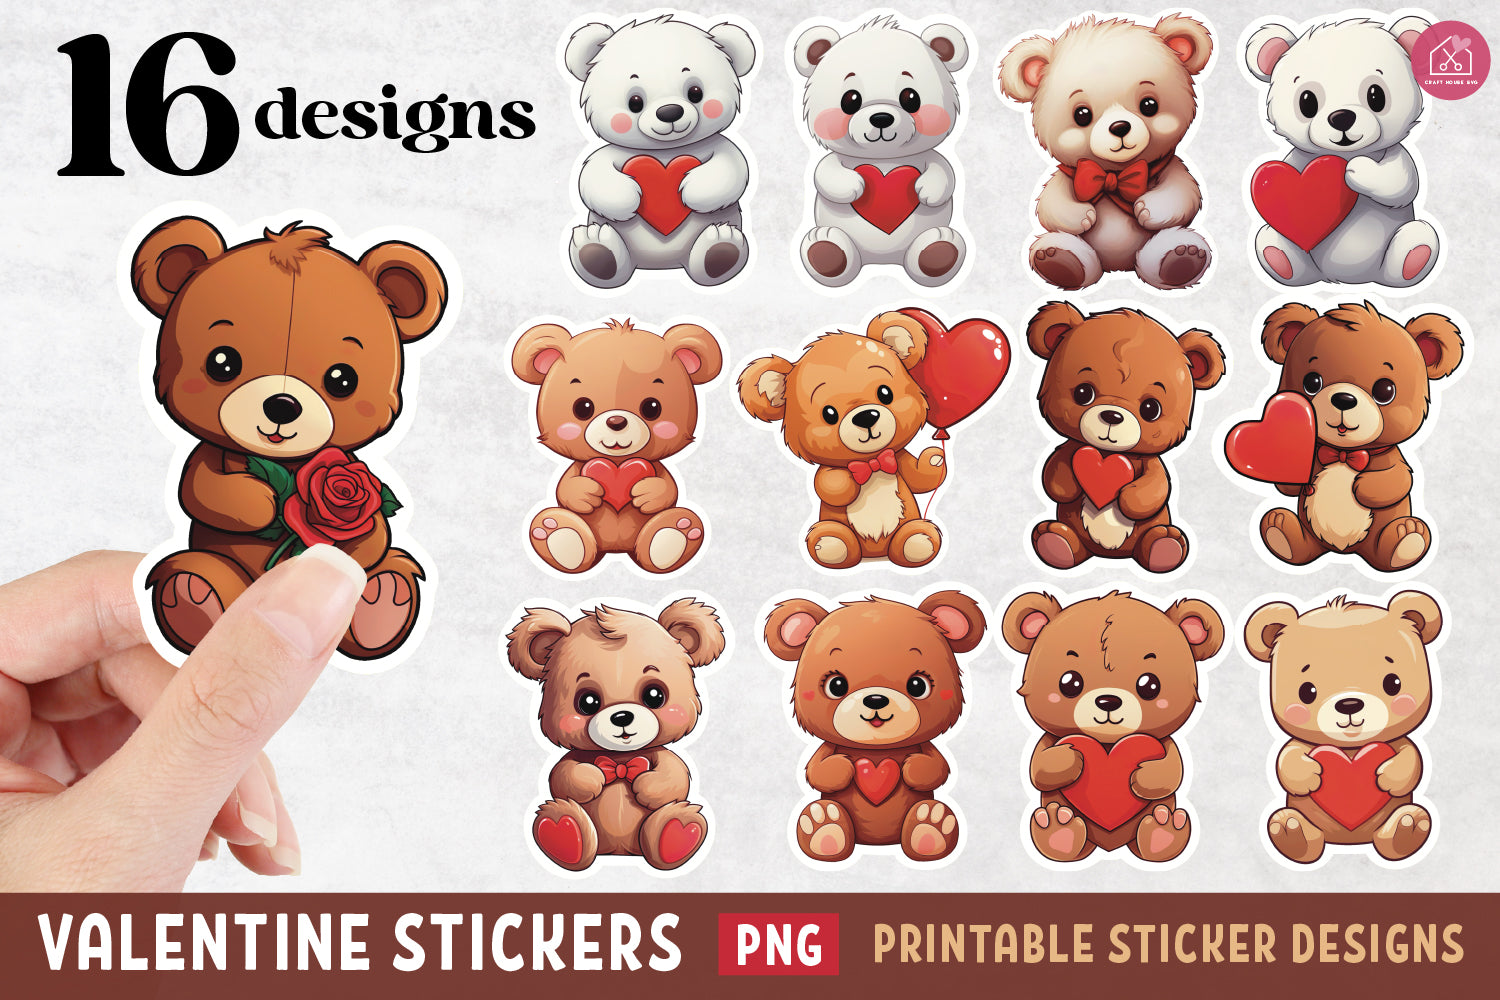 Valentine Teddy Bear Stickers PNG Print and Cut Sticker Designs